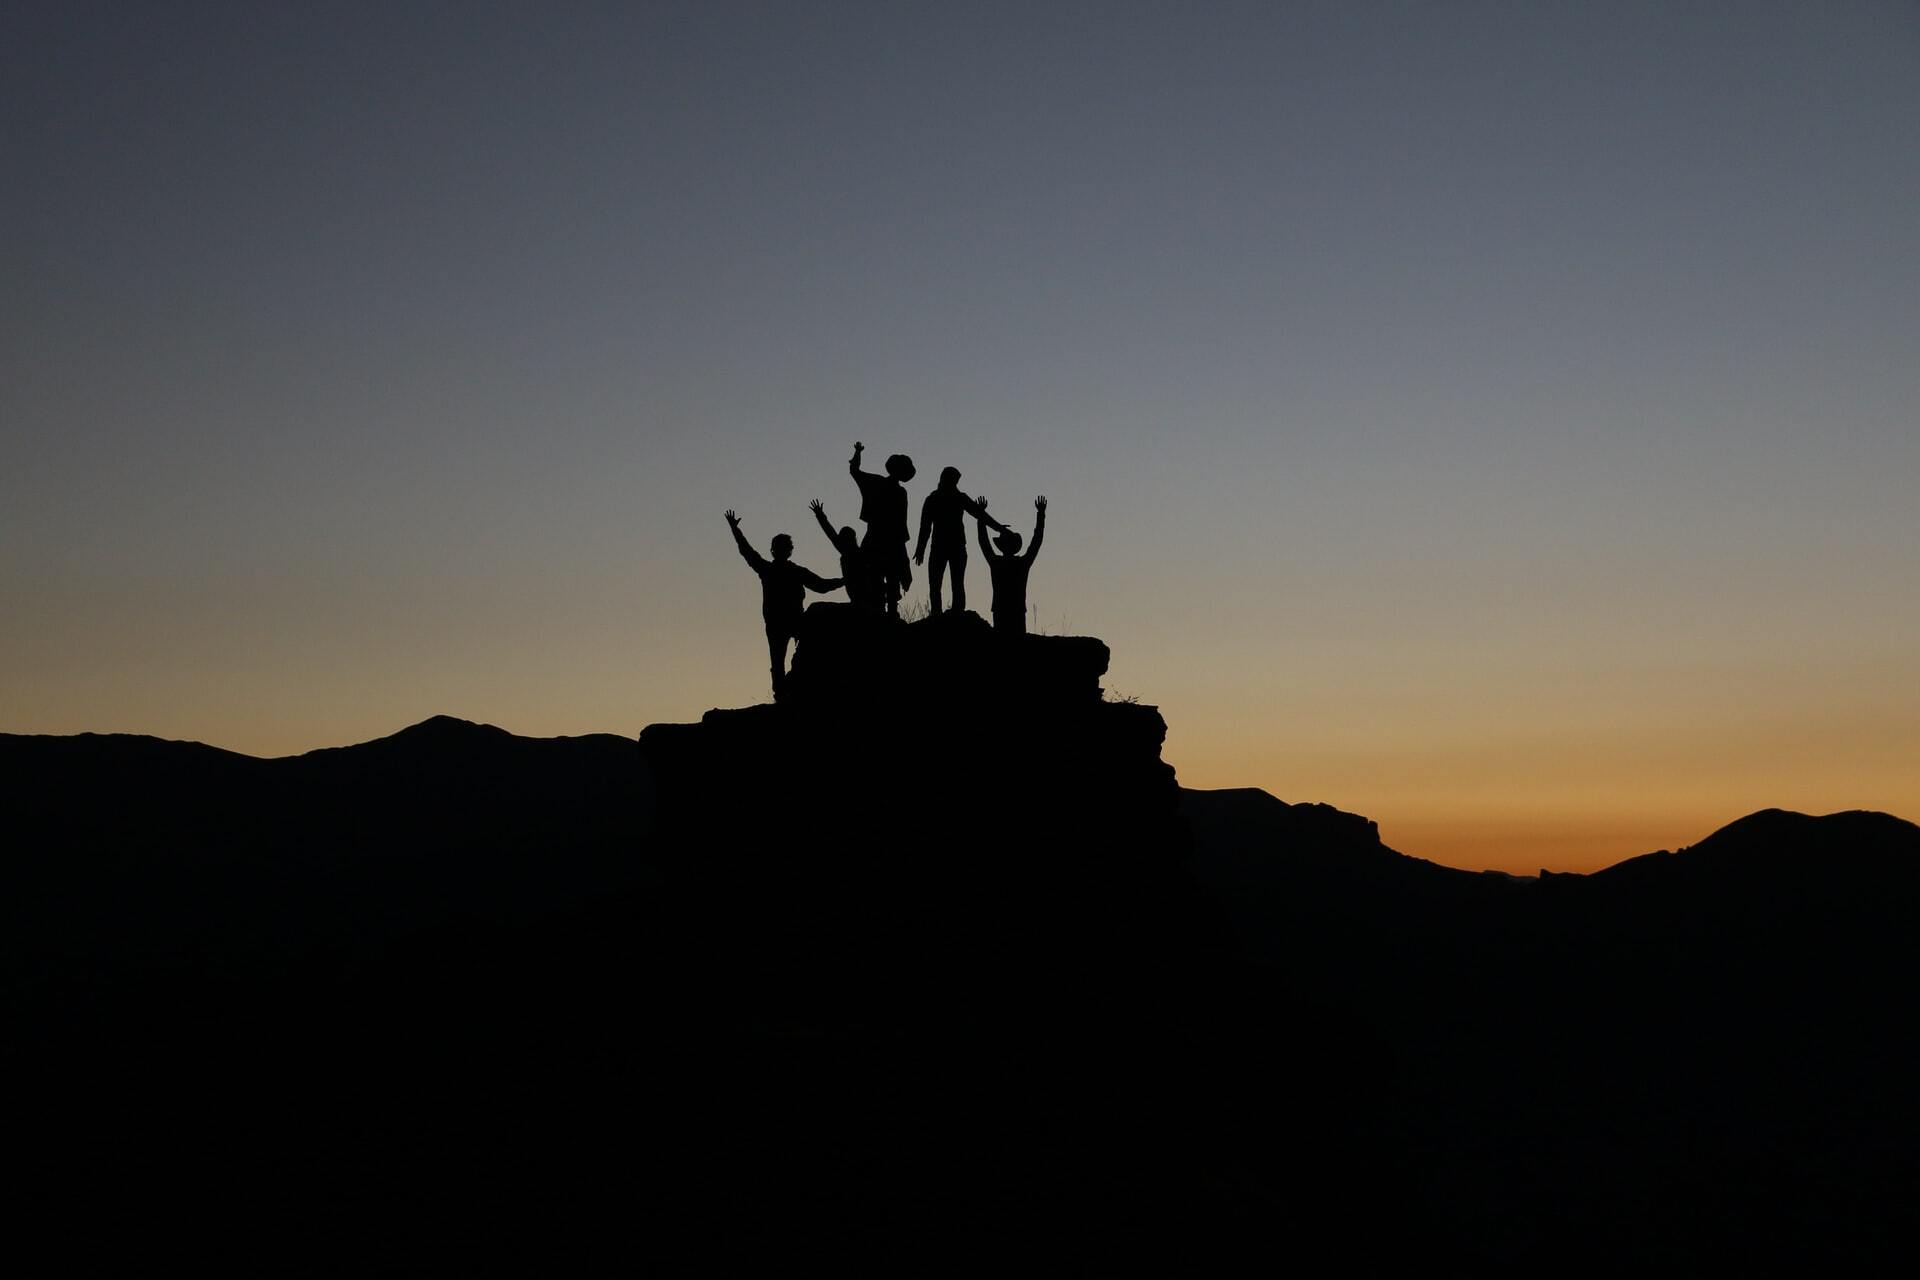 Team reaching the summit together